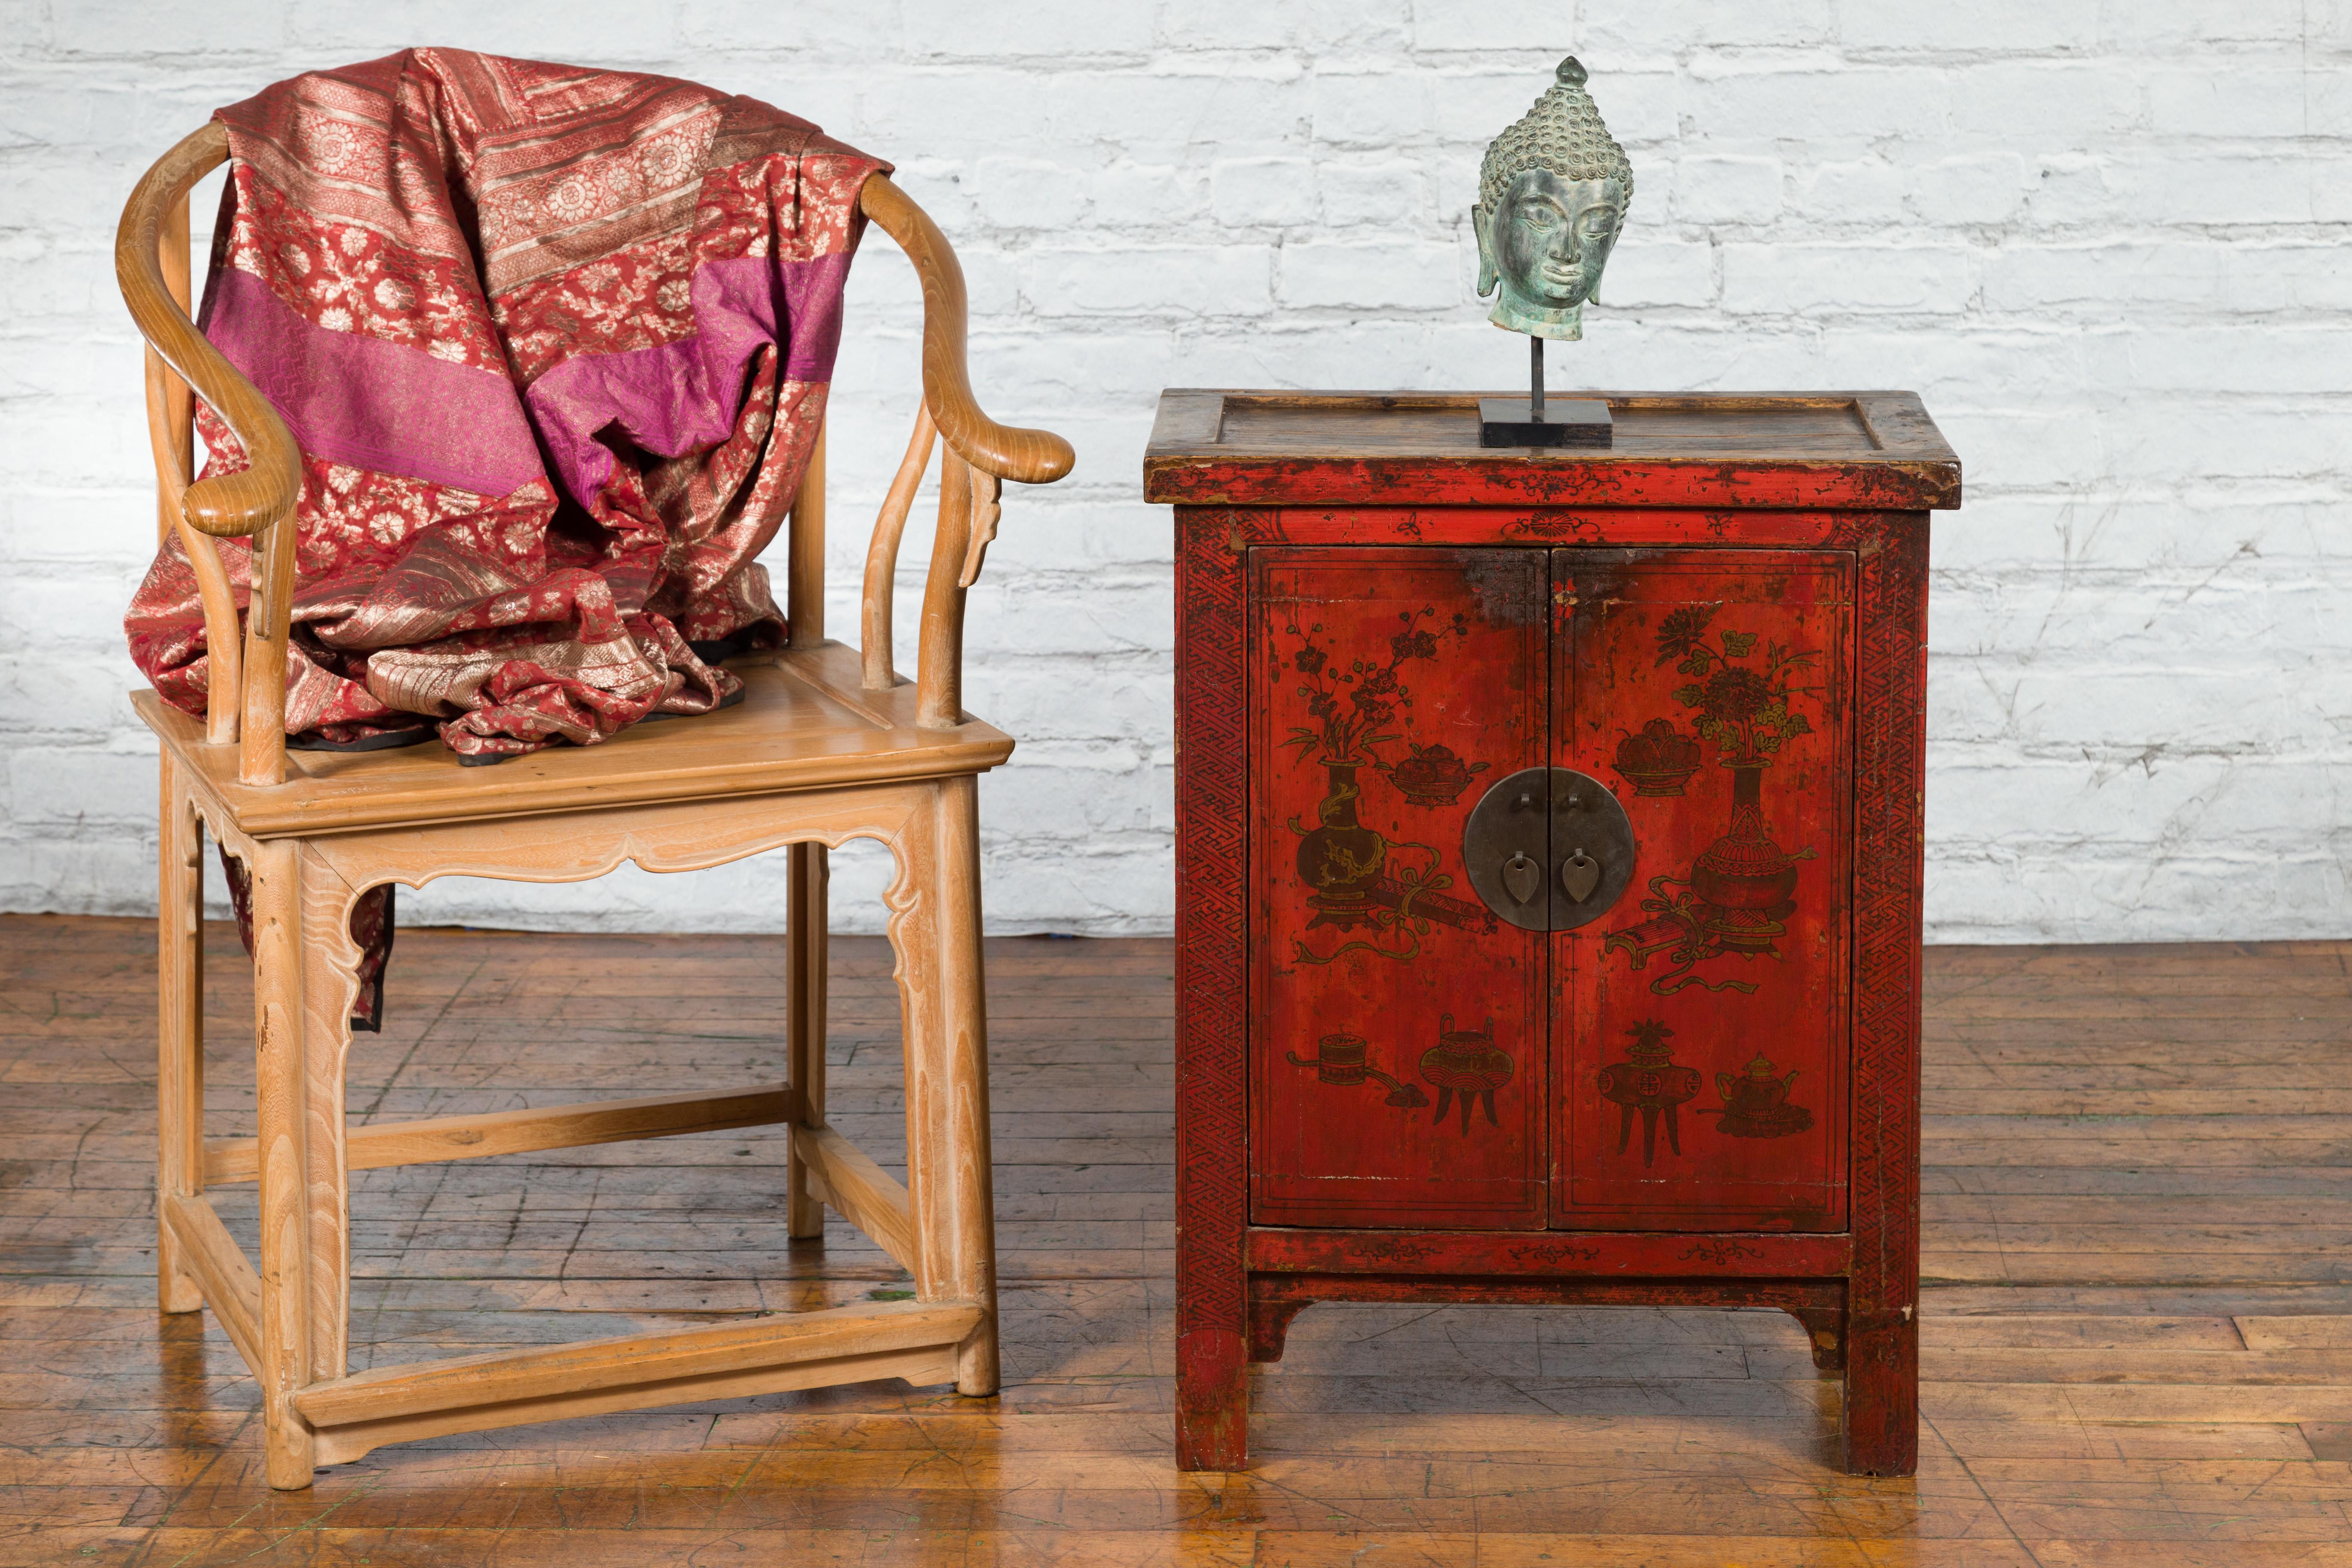 A Chinese Qing Dynasty period red lacquered small cabinet from the 19th century, with painted flowers and vase scene. Created in China during the Qing Dynasty, this small cabinet features a linear silhouette perfectly complimented by a red lacquer.